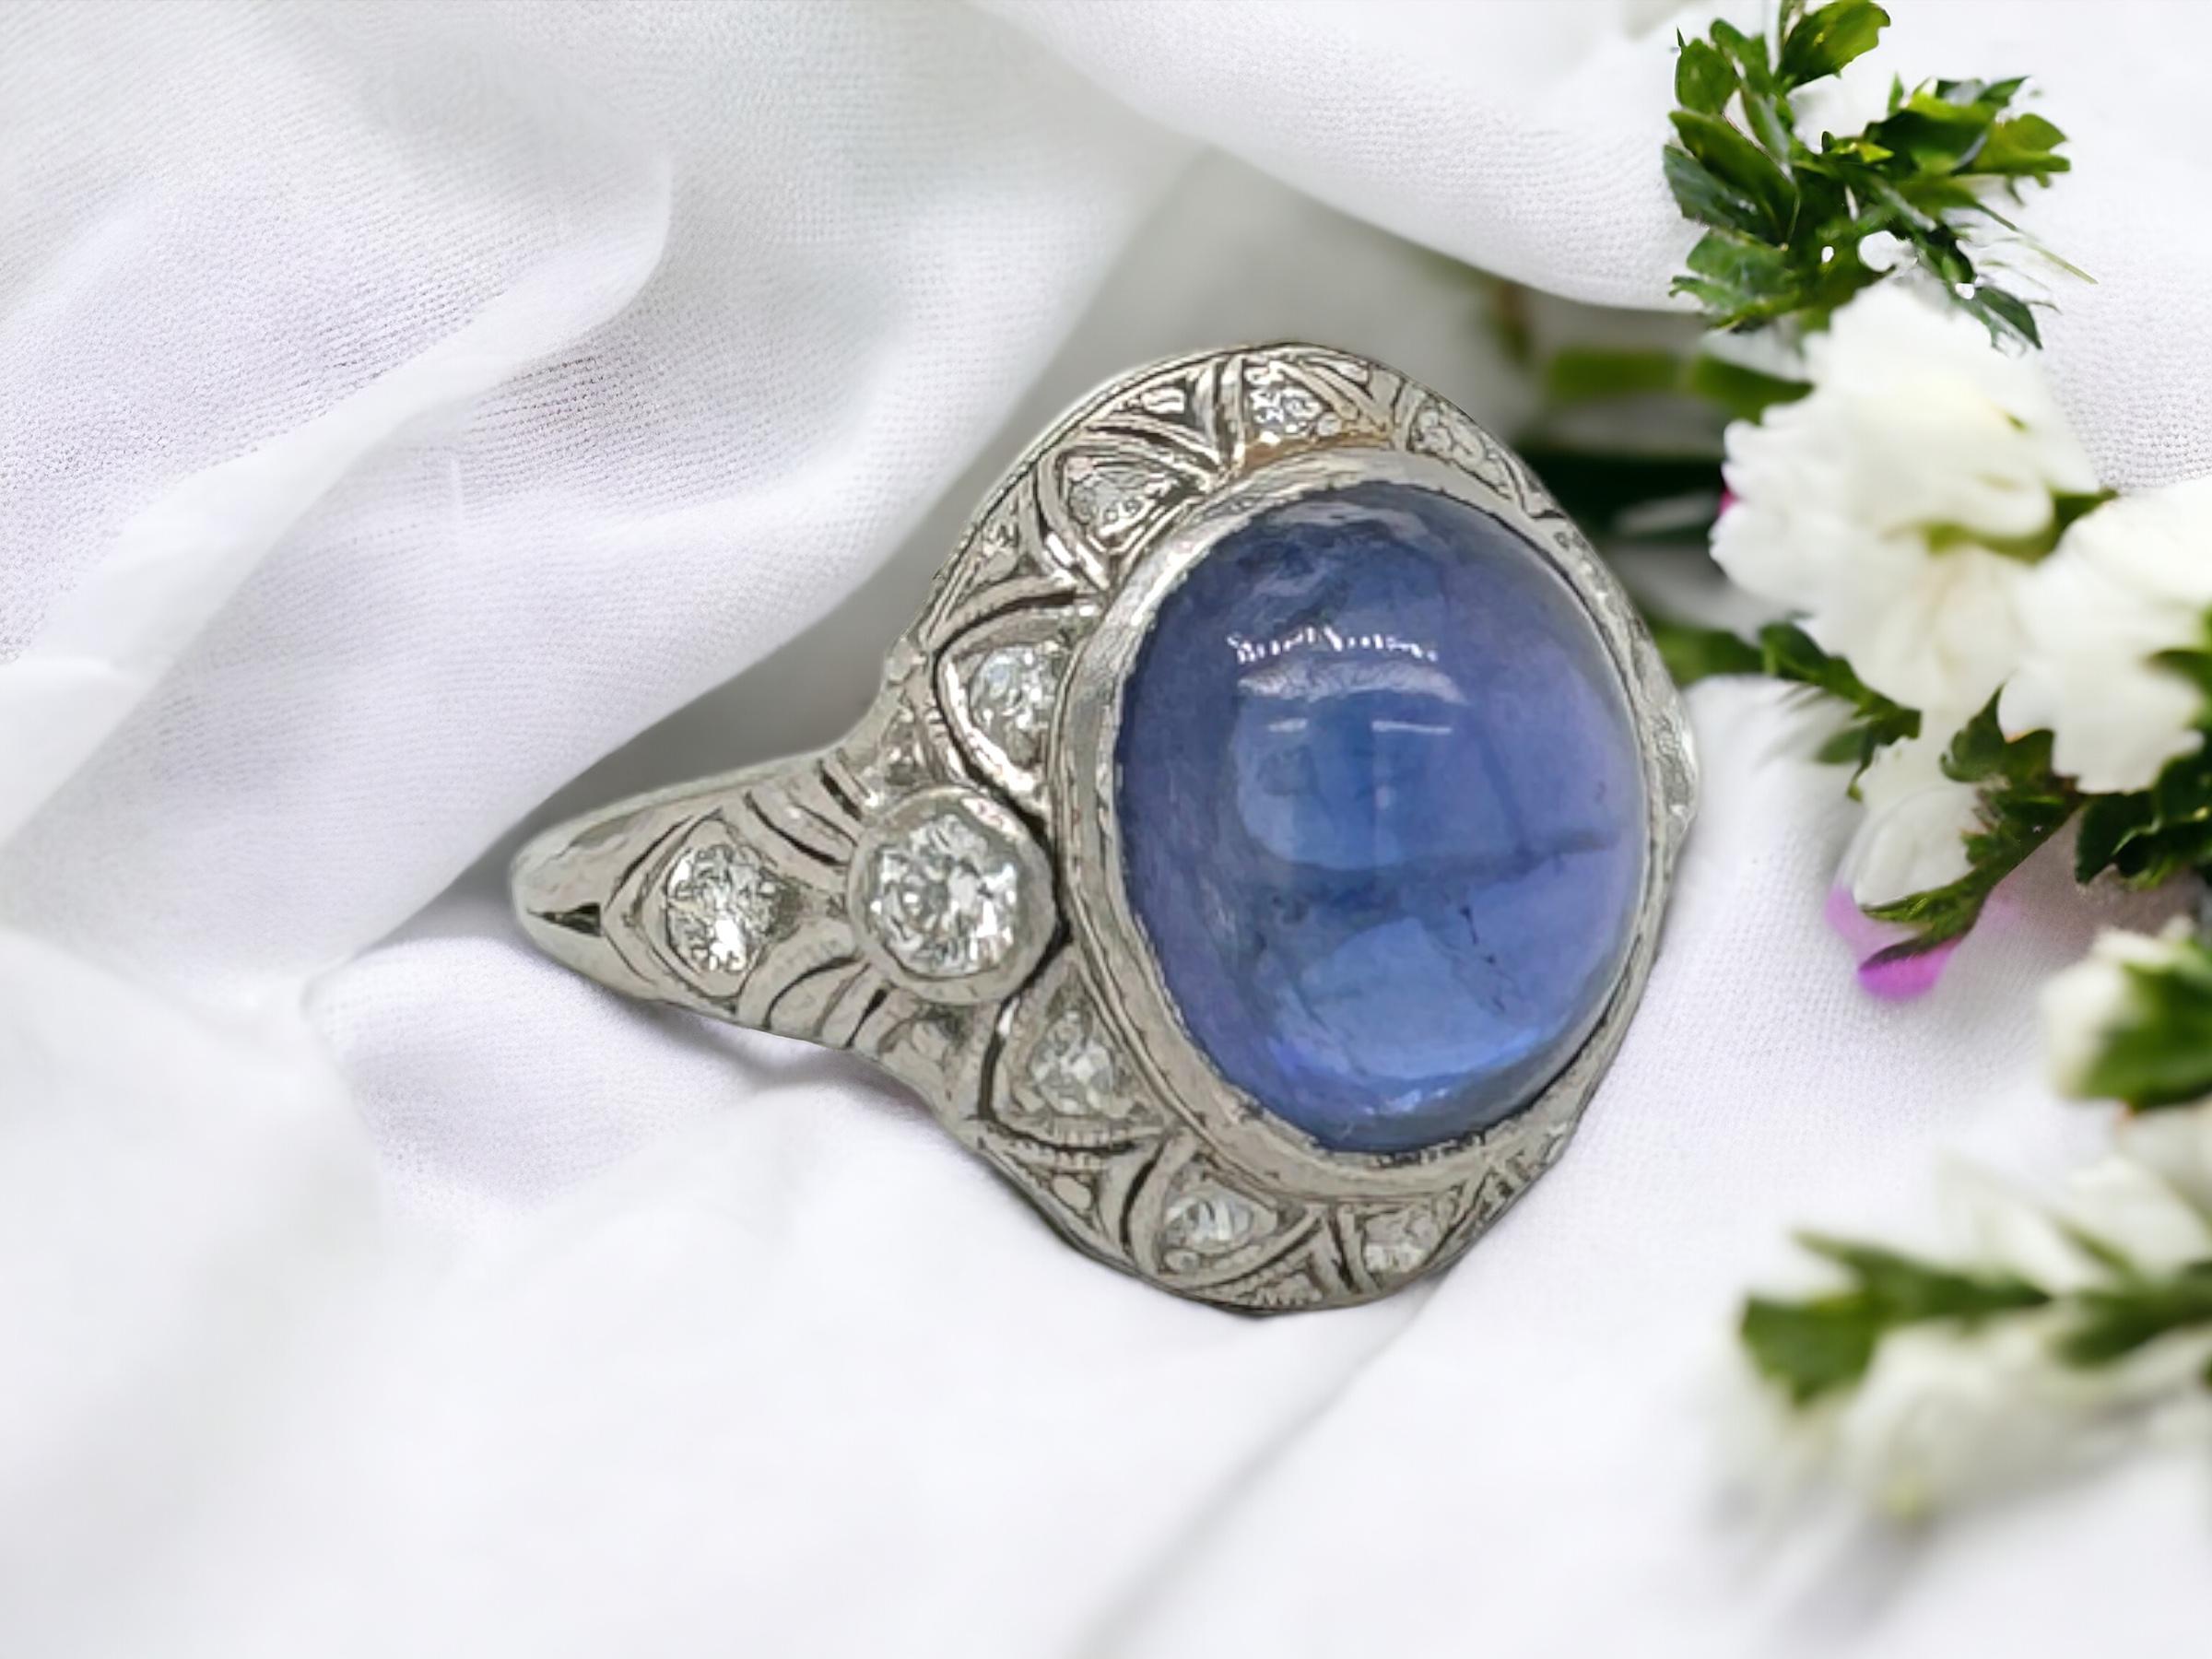 This is one of the most unique & magical pieces currently in our collection!
The center stone is a rare natural color change sapphire. 
This natural phenomenon is caused by trace elements inside the stone.
When exposed to natural daylight or